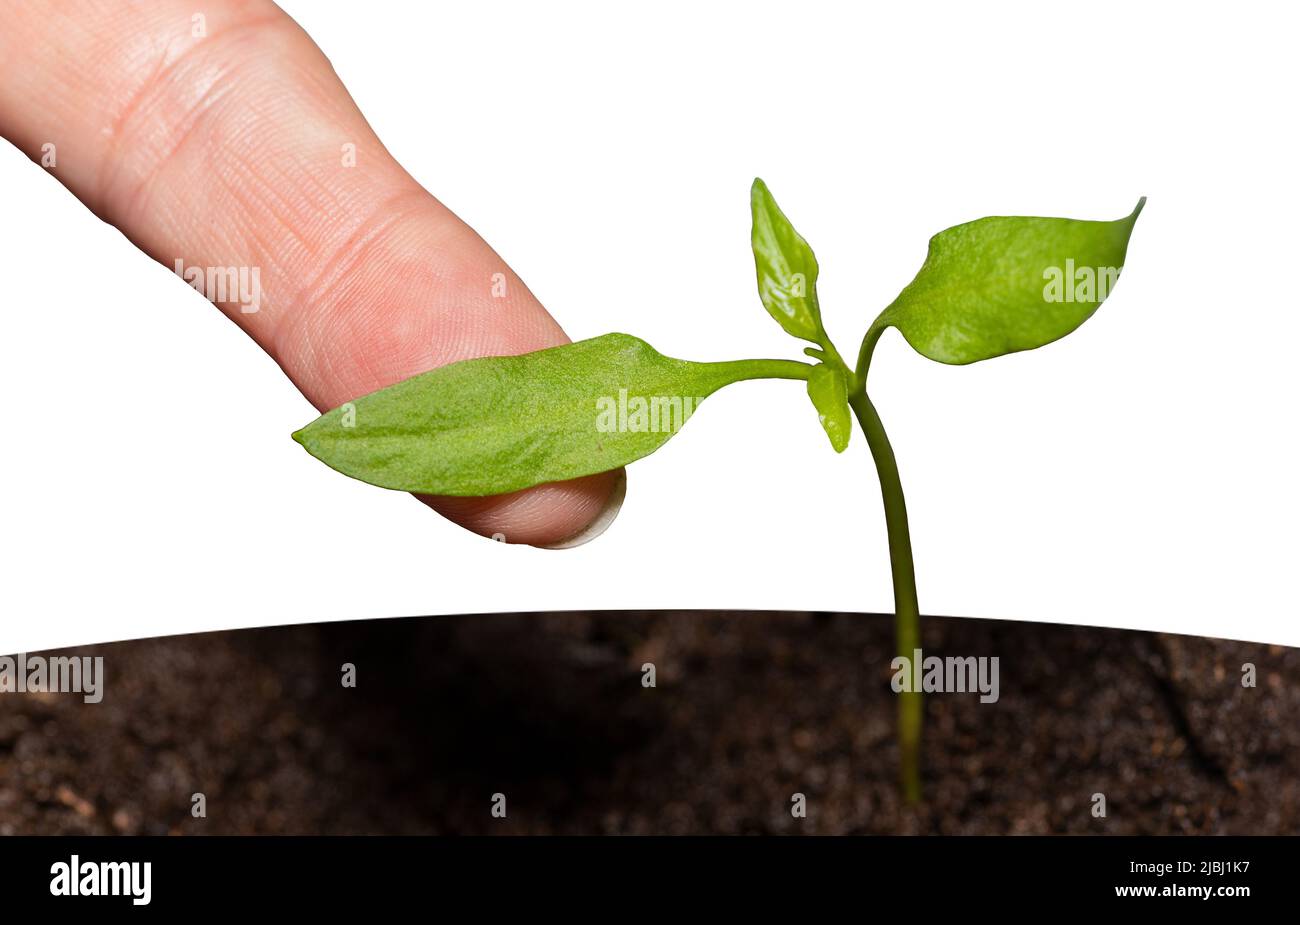 A woman's finger touches a tender seedling, isolated on a white background. Stock Photo